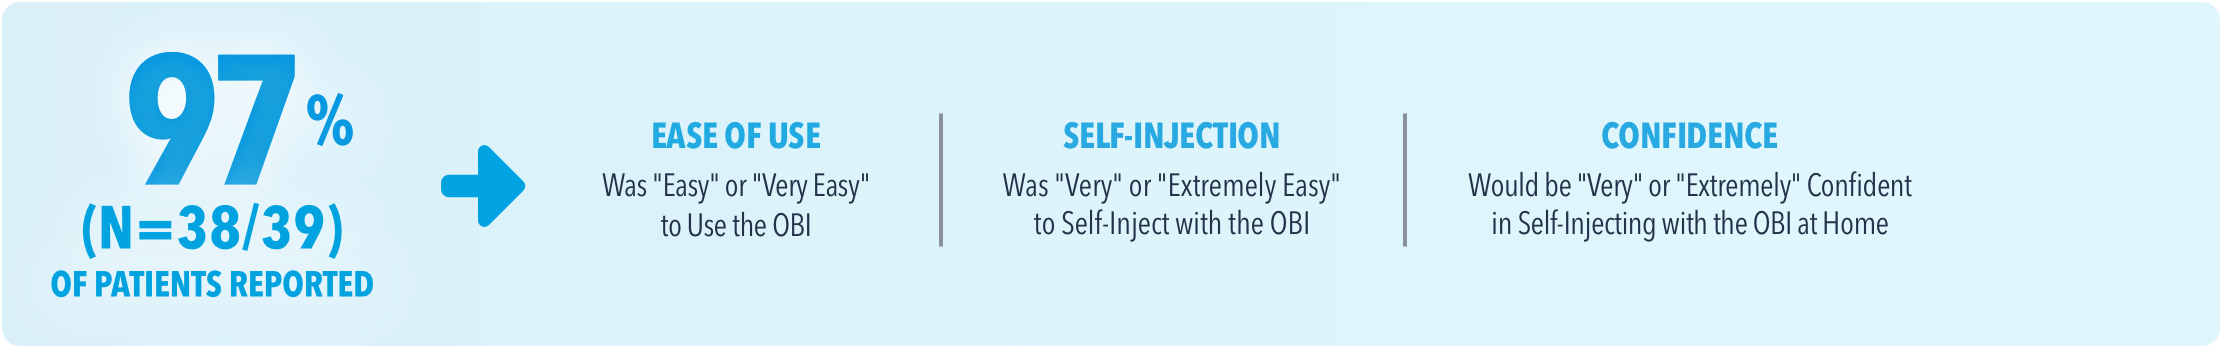 97% of (N=38/39) of patients reported ease of use was "easy" or "very easy" to use the OBI, self-injection was "Very" or "Extremely Easy" to self-inject with the OBI, confidence would be "very" or "extremely" confident in self-injecting with the OBI at home